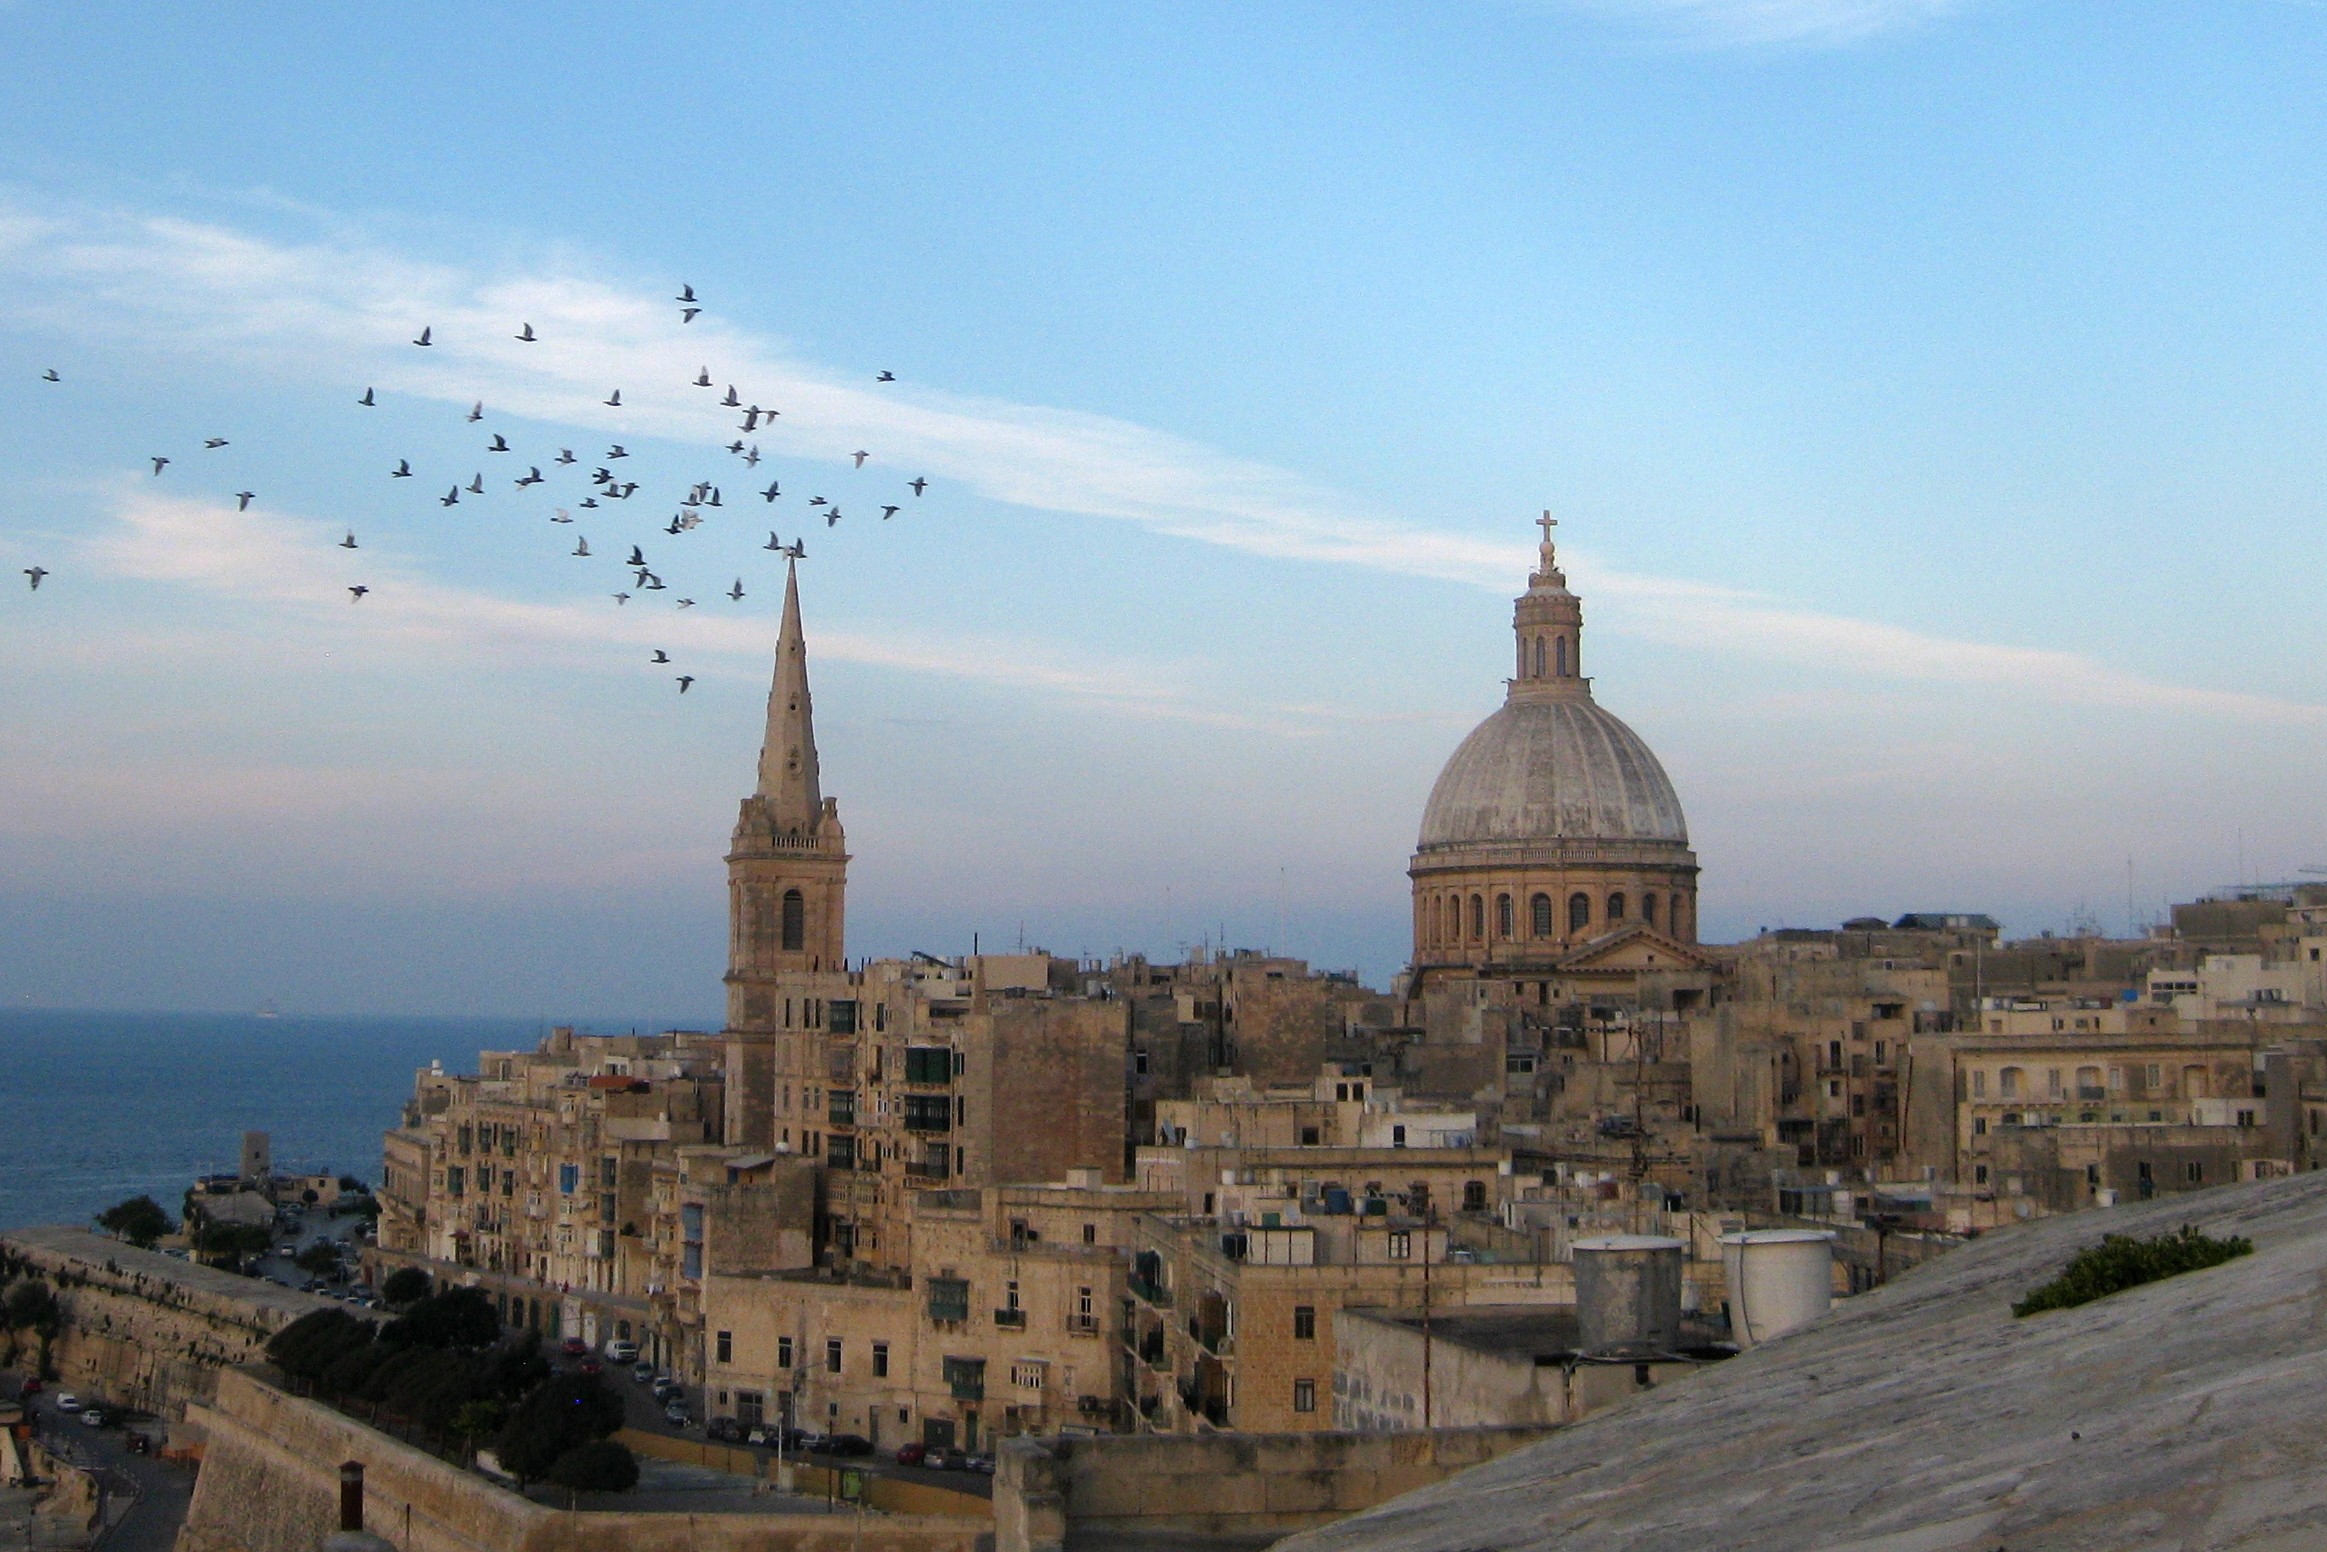 Nicholas Thompson spent two weeks in 2012 exploring the Valletta in Malta, sketching, taking photographs, and making notes on its architecture and built form